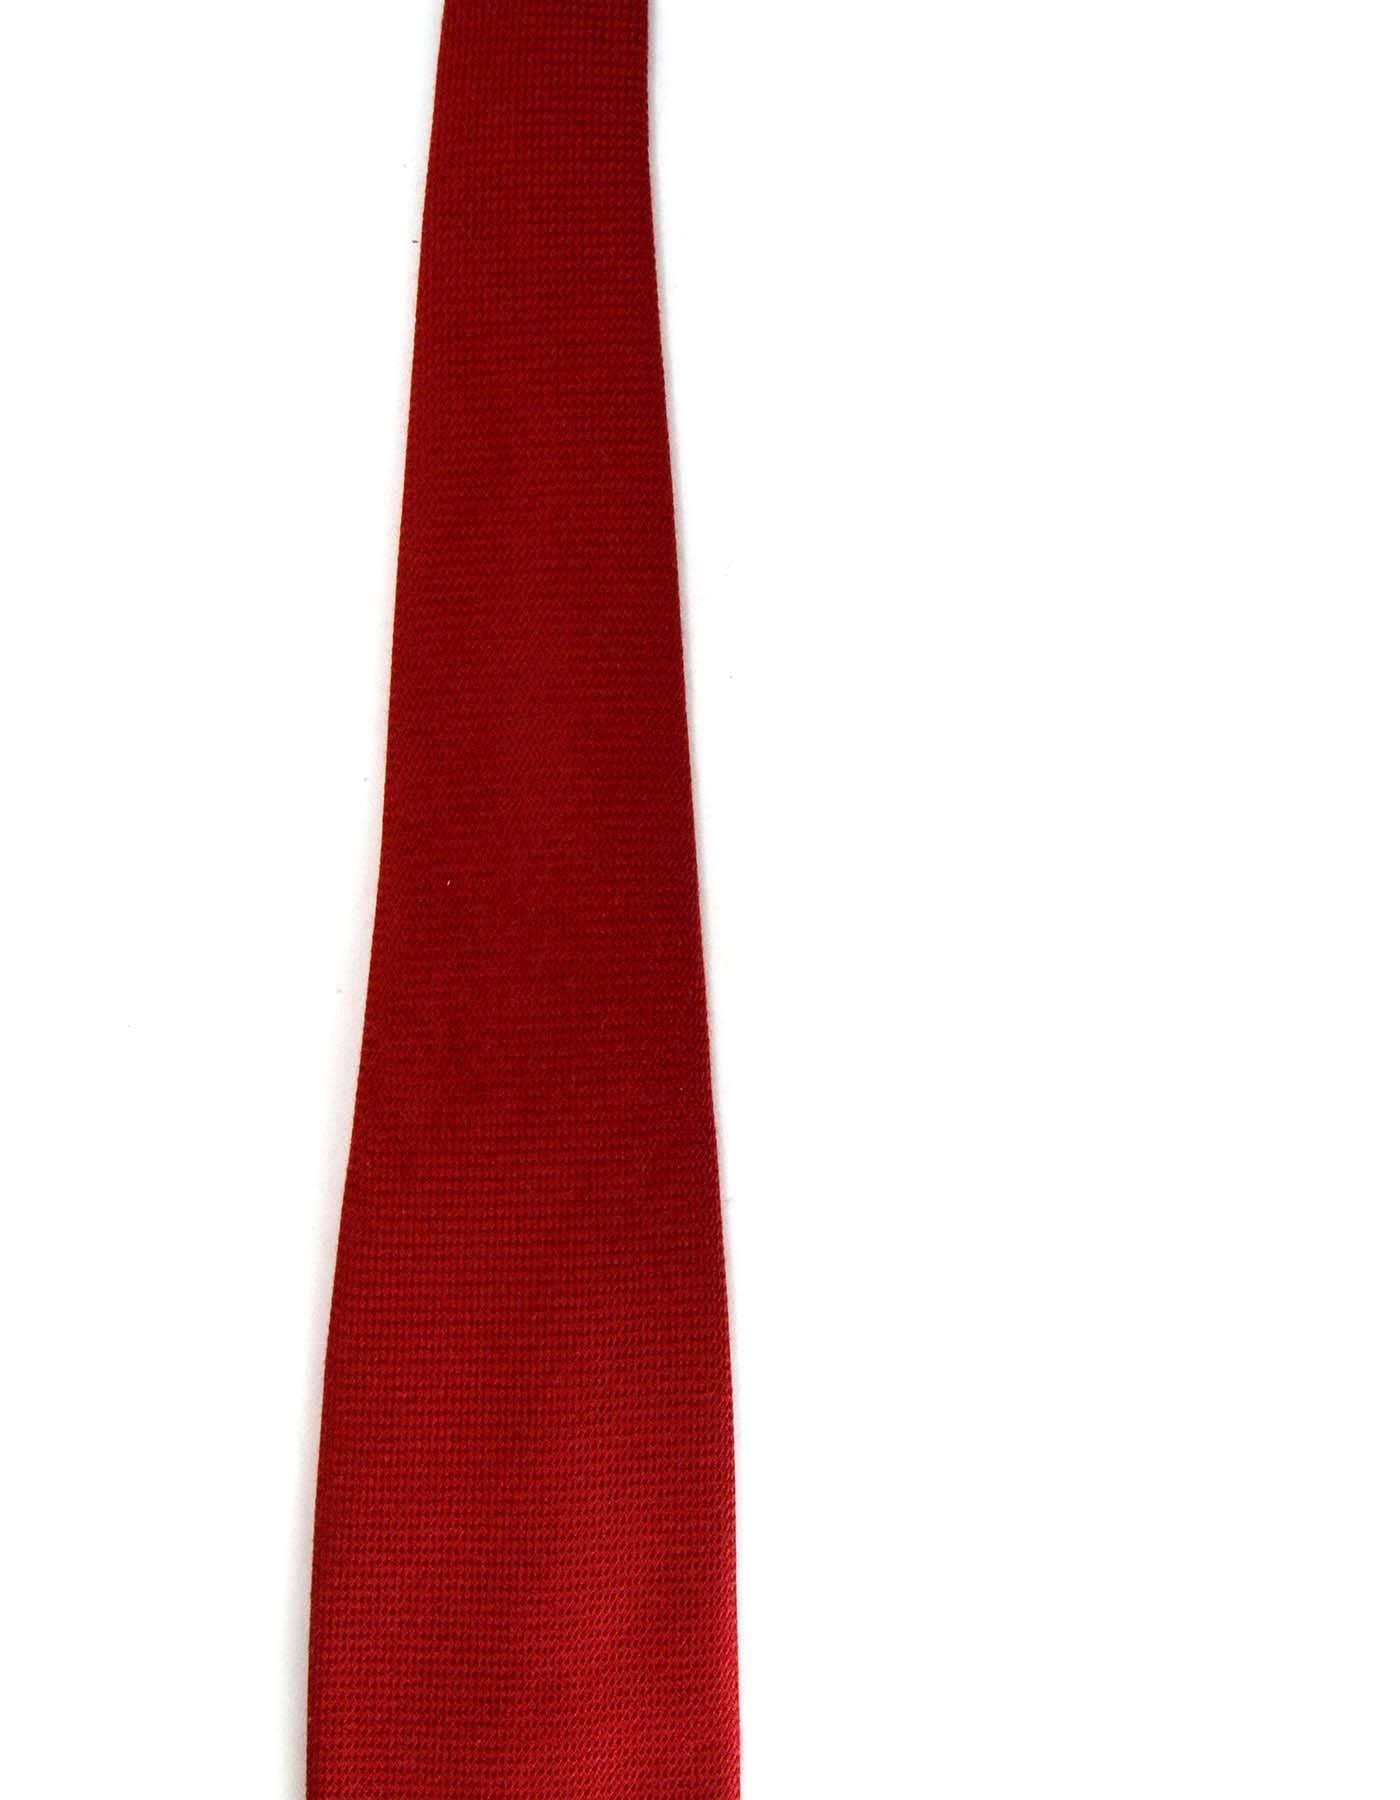 Hermes Red Woven Silk Square Tie
Made In: France
Color: Red
Composition: 100% silk
Overall Condition: Excellent pre-owned condition
Measurements: 
Length:59.5